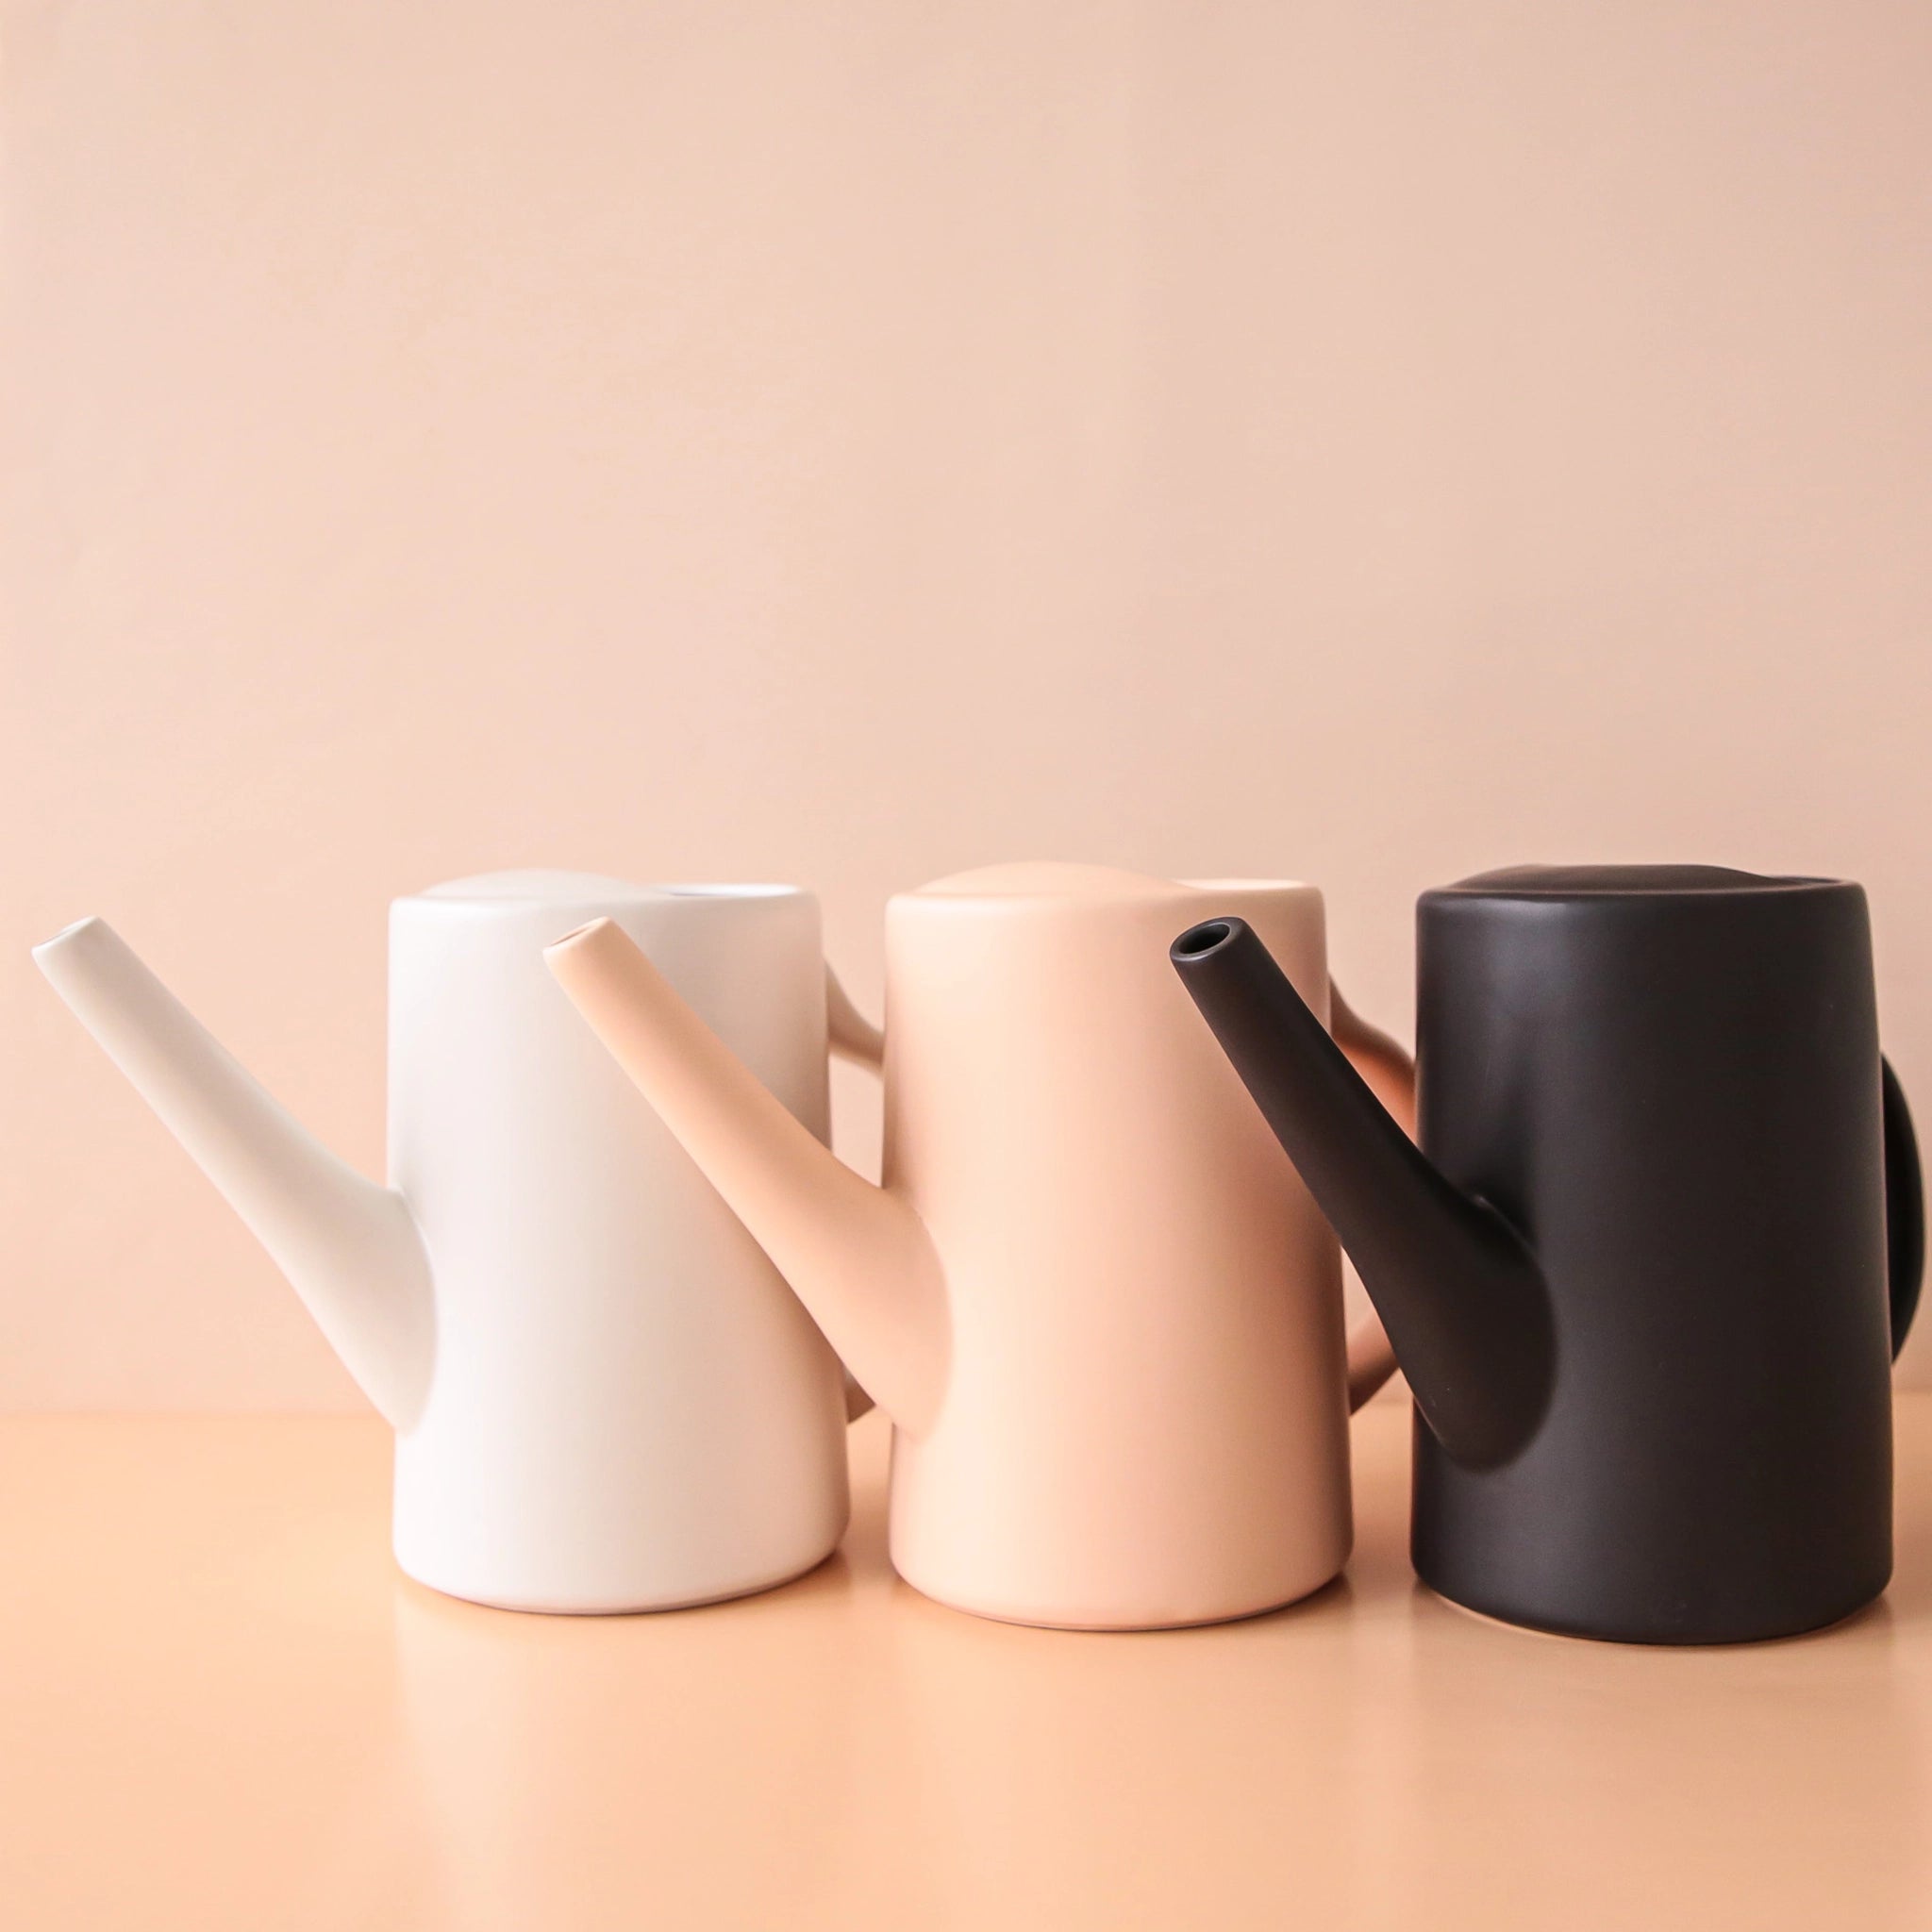 On a peachy background is three ceramic watering cans in a blush color as well as white and black. They have narrow spouts and curved handles.